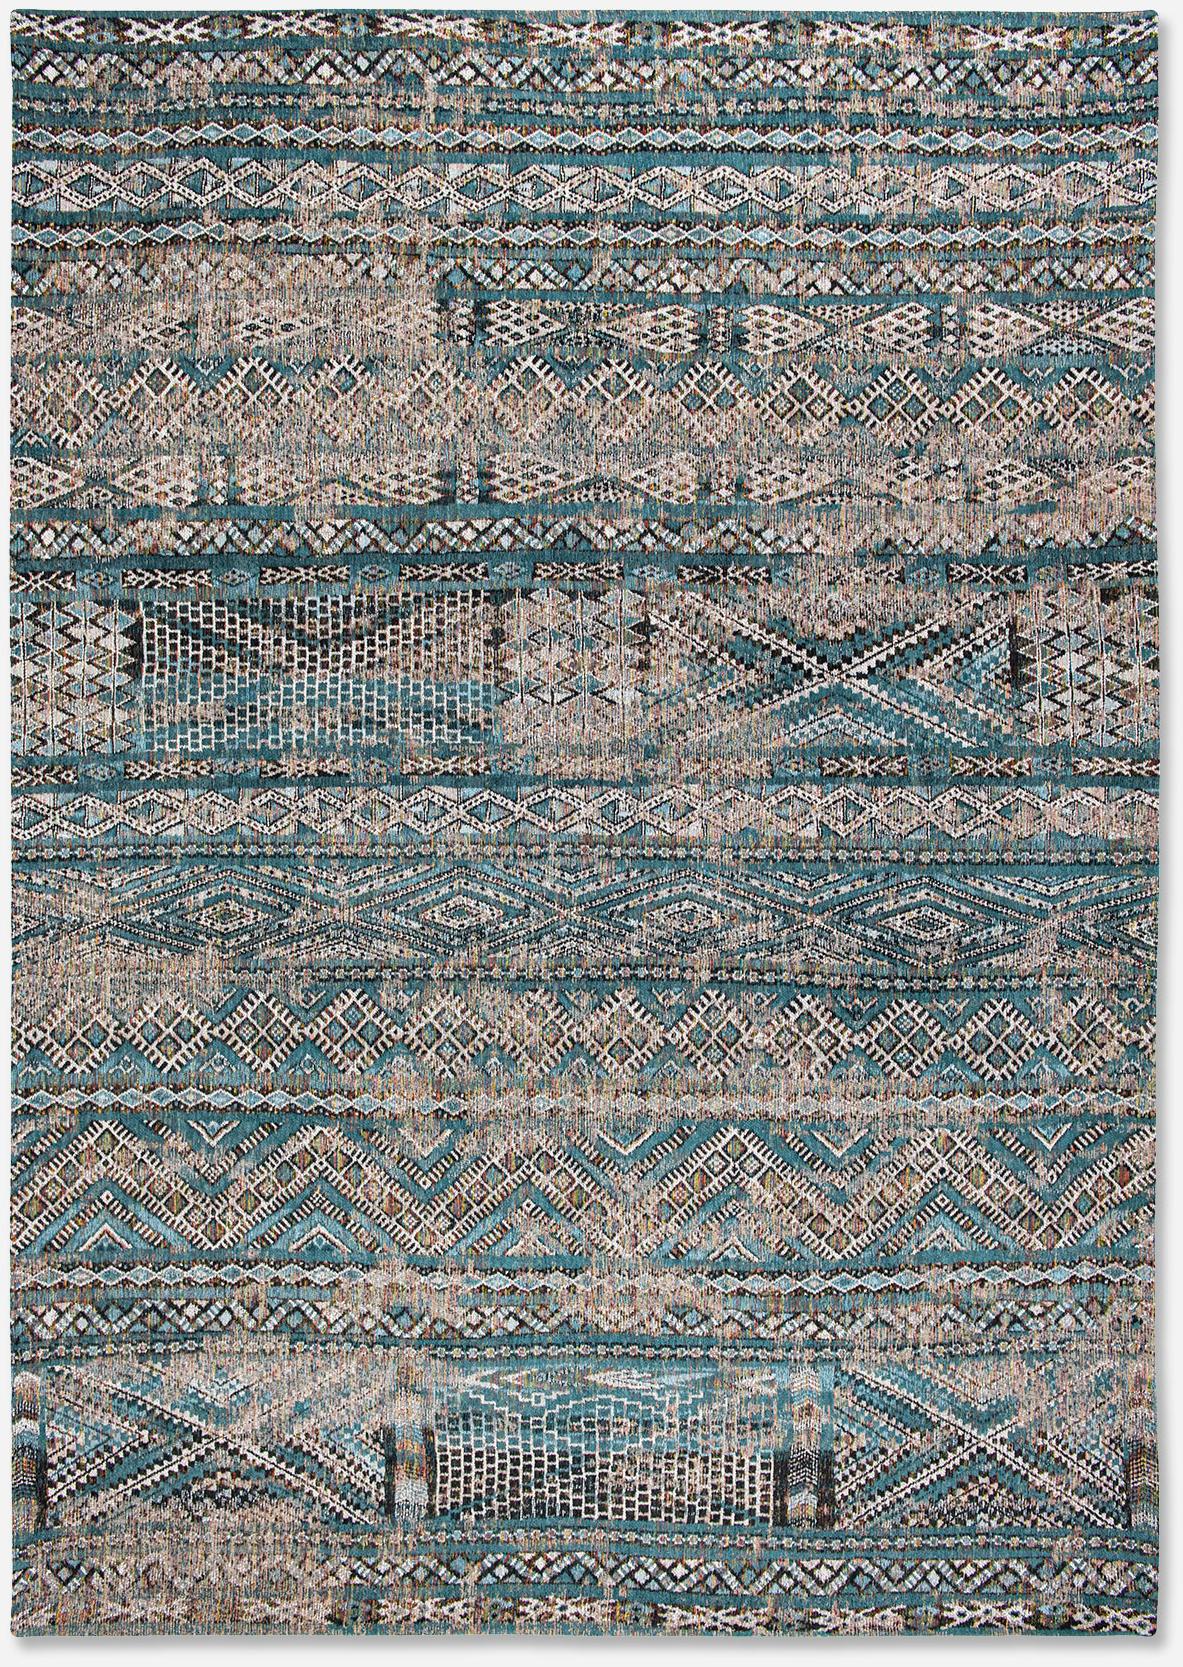 Antiquarian Flatwoven Rug ☞ Size: 5' 7" x 8' (170 x 240 cm)